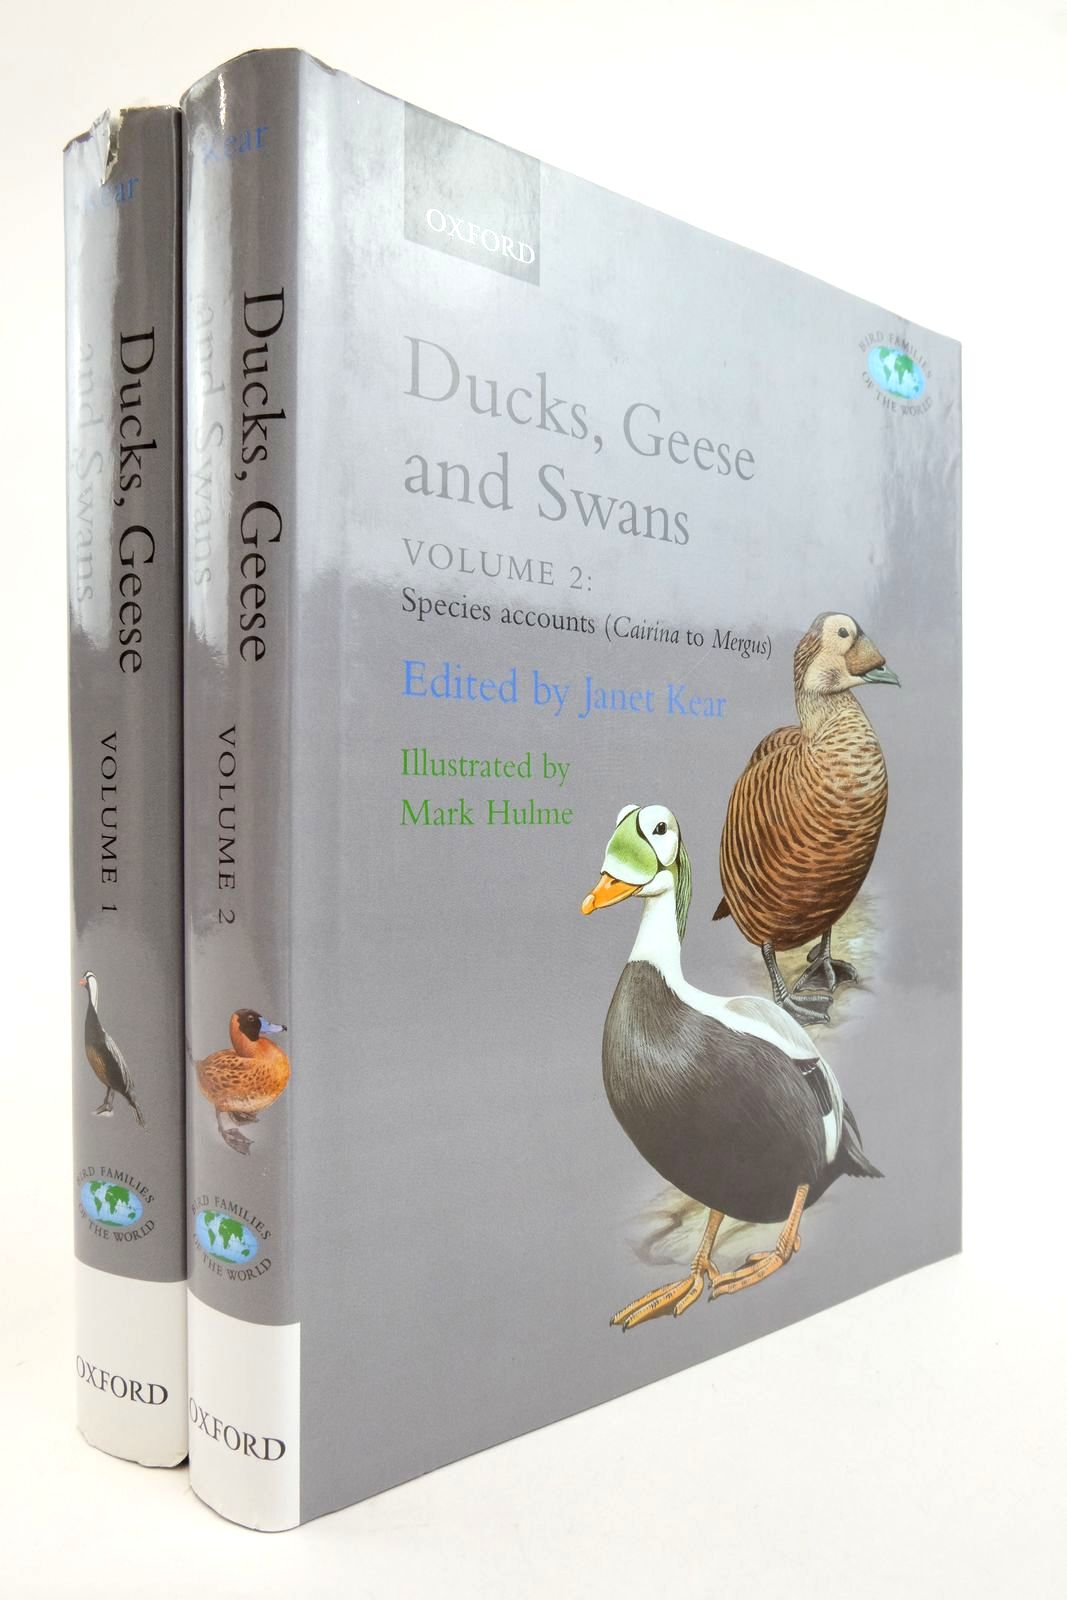 Ducks, Geese and Swans (2 Volumes)